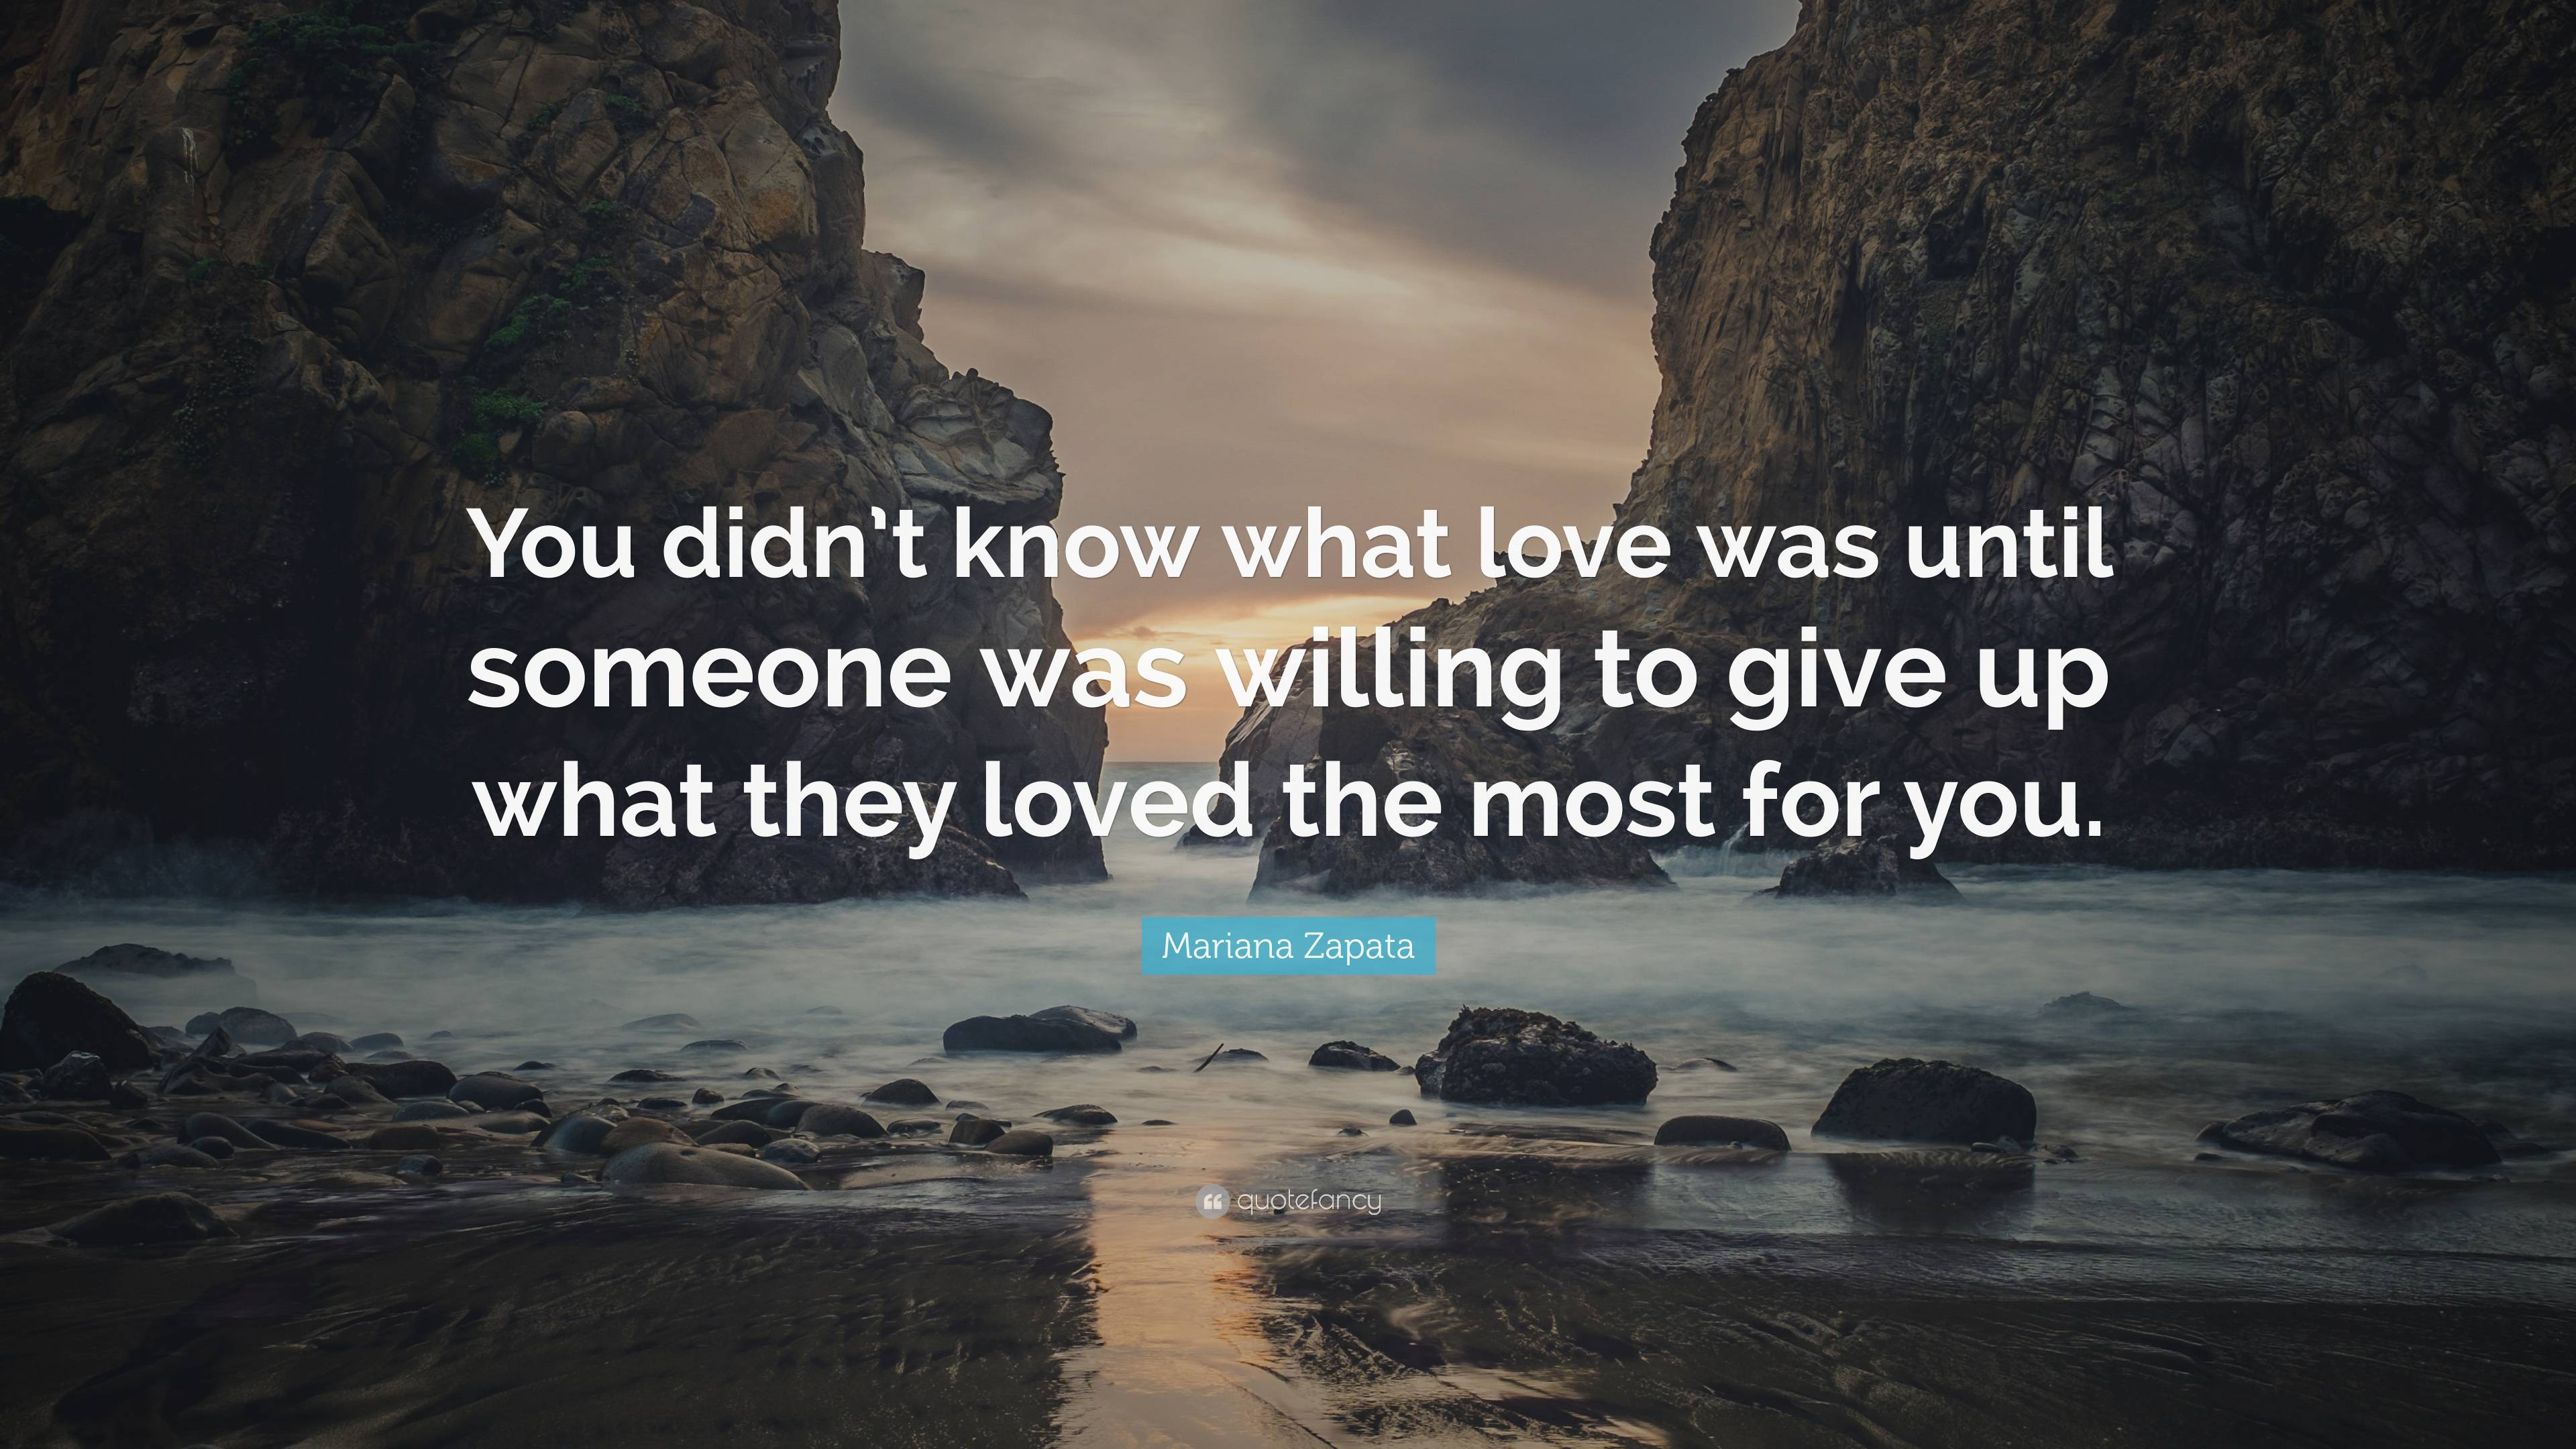 Mariana Zapata Quote: “You didn’t know what love was until someone was ...